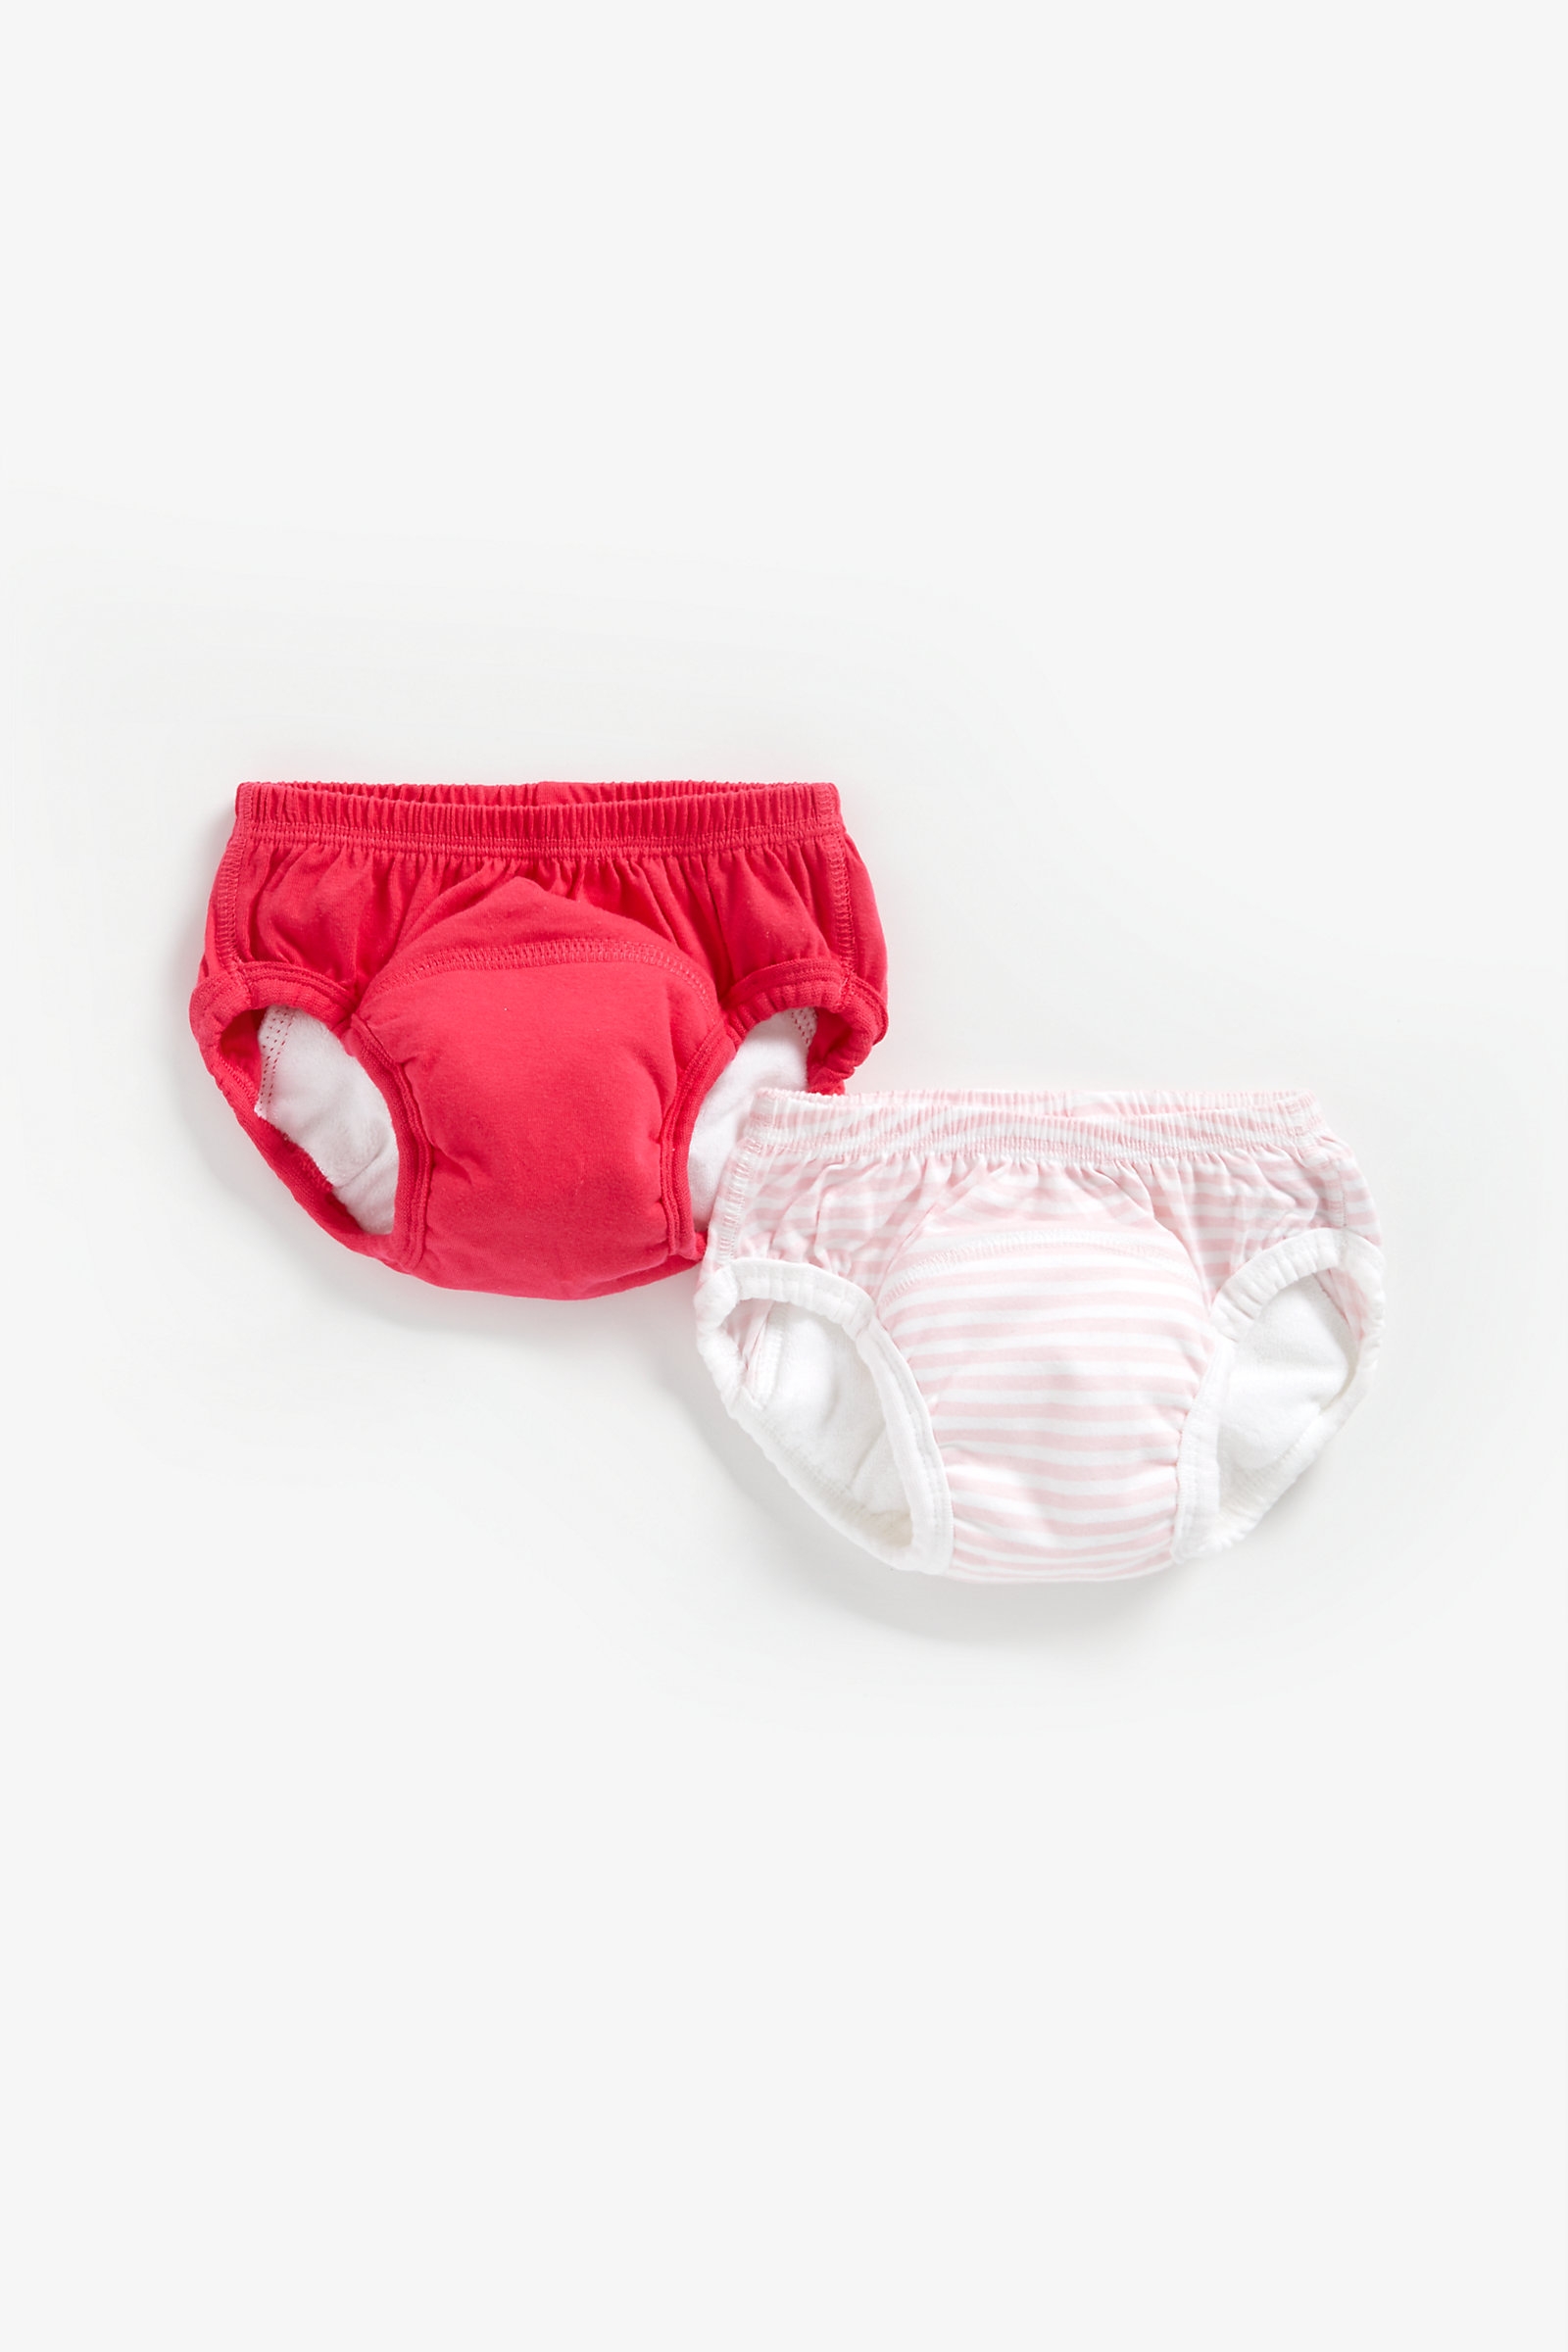 Mothercare trainer pants pink small pack of 2